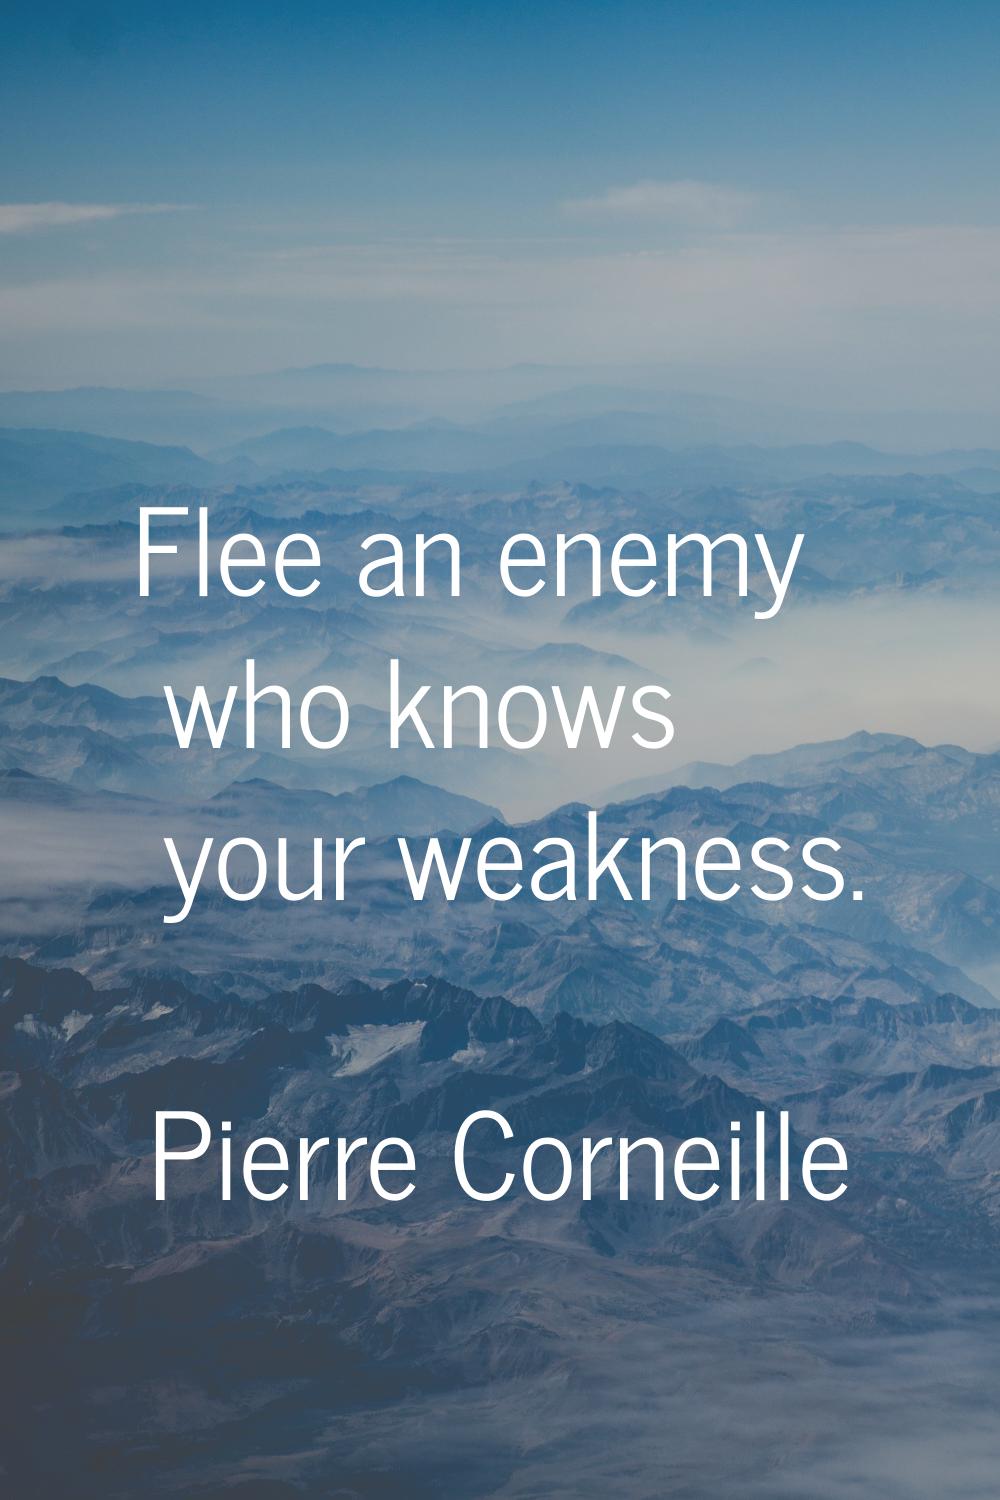 Flee an enemy who knows your weakness.